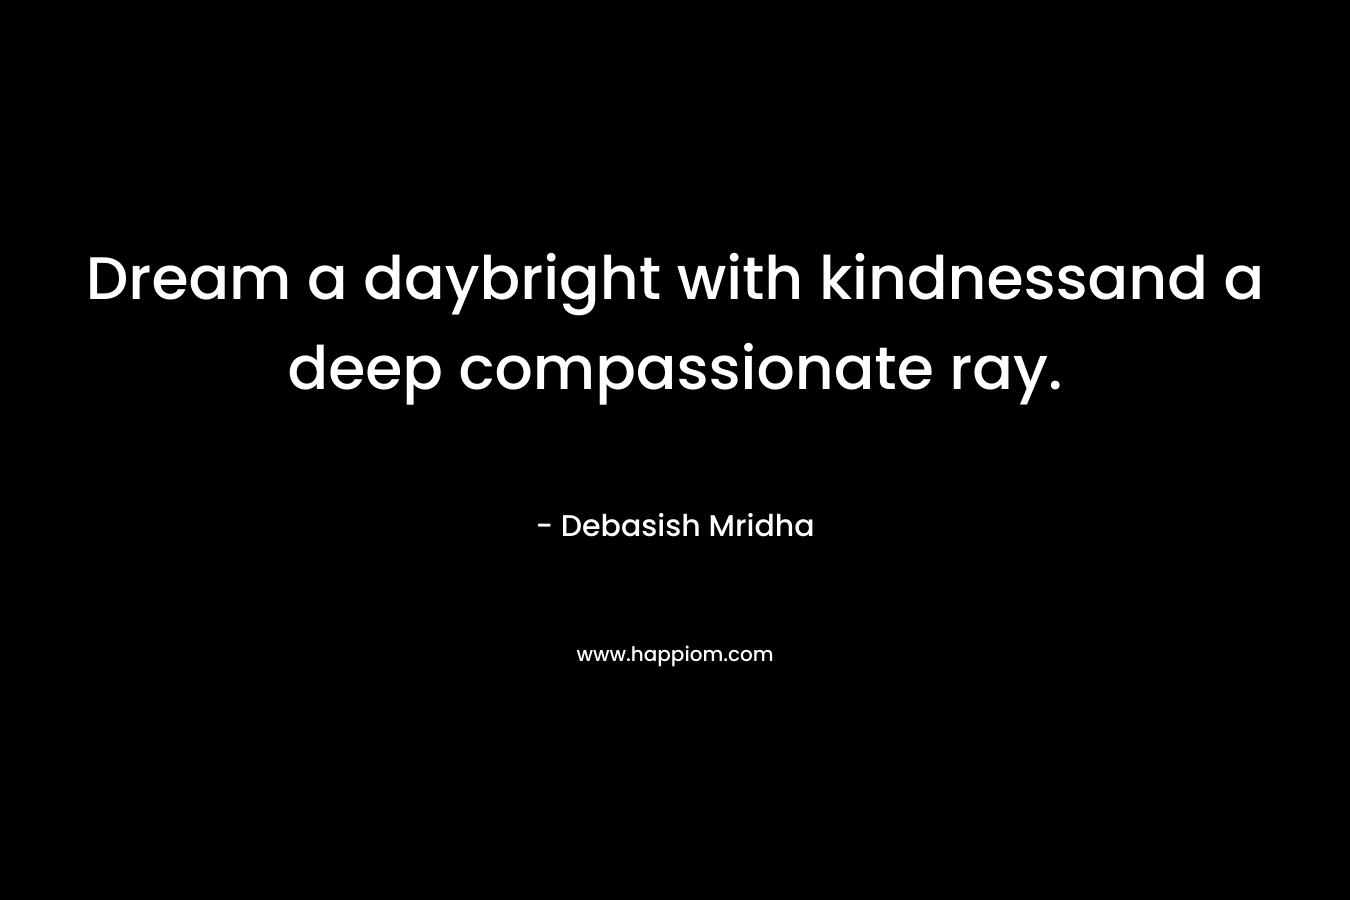 Dream a daybright with kindnessand a deep compassionate ray.